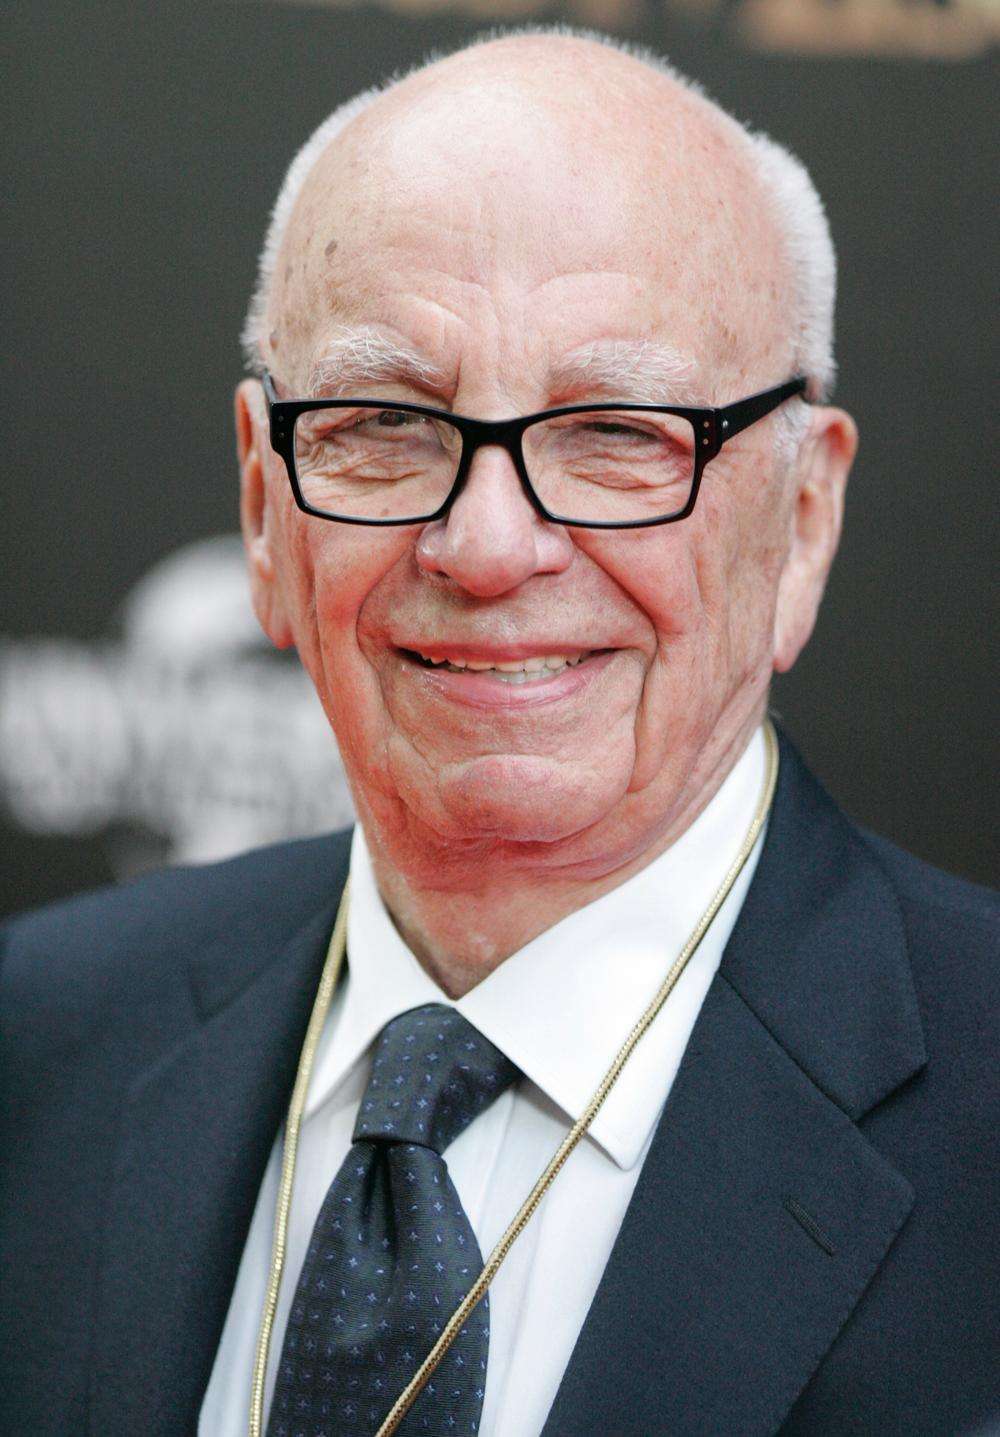 In 2011, Rupert Murdoch was attacked by a comedian who hit Murdoch in the face with a cream pie. "It is a far better thing that I do now than I have ever done before #splat," the attacker tweeted moments before making his move.